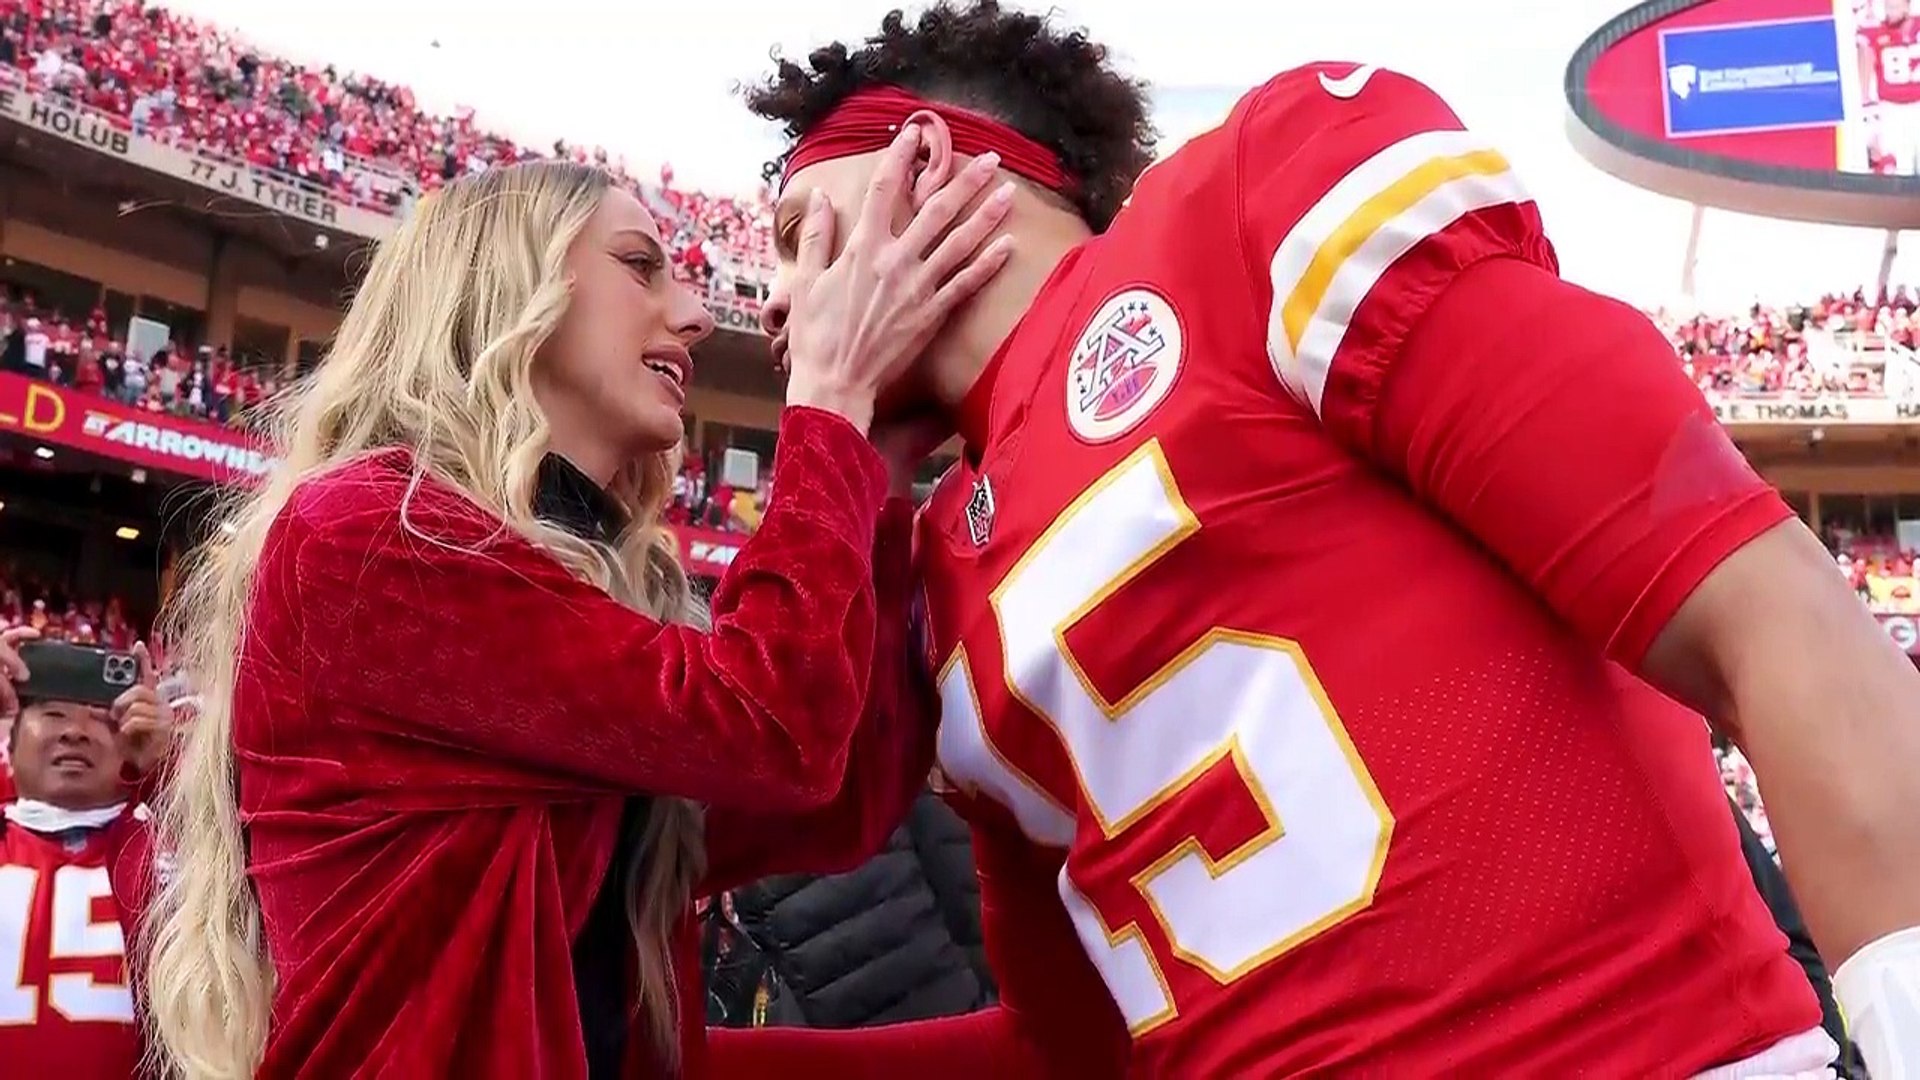 Patrick Mahomes and Brittany Matthews Share 1st Photo of Son Bronze's Face  After Super Bowl LVII Win